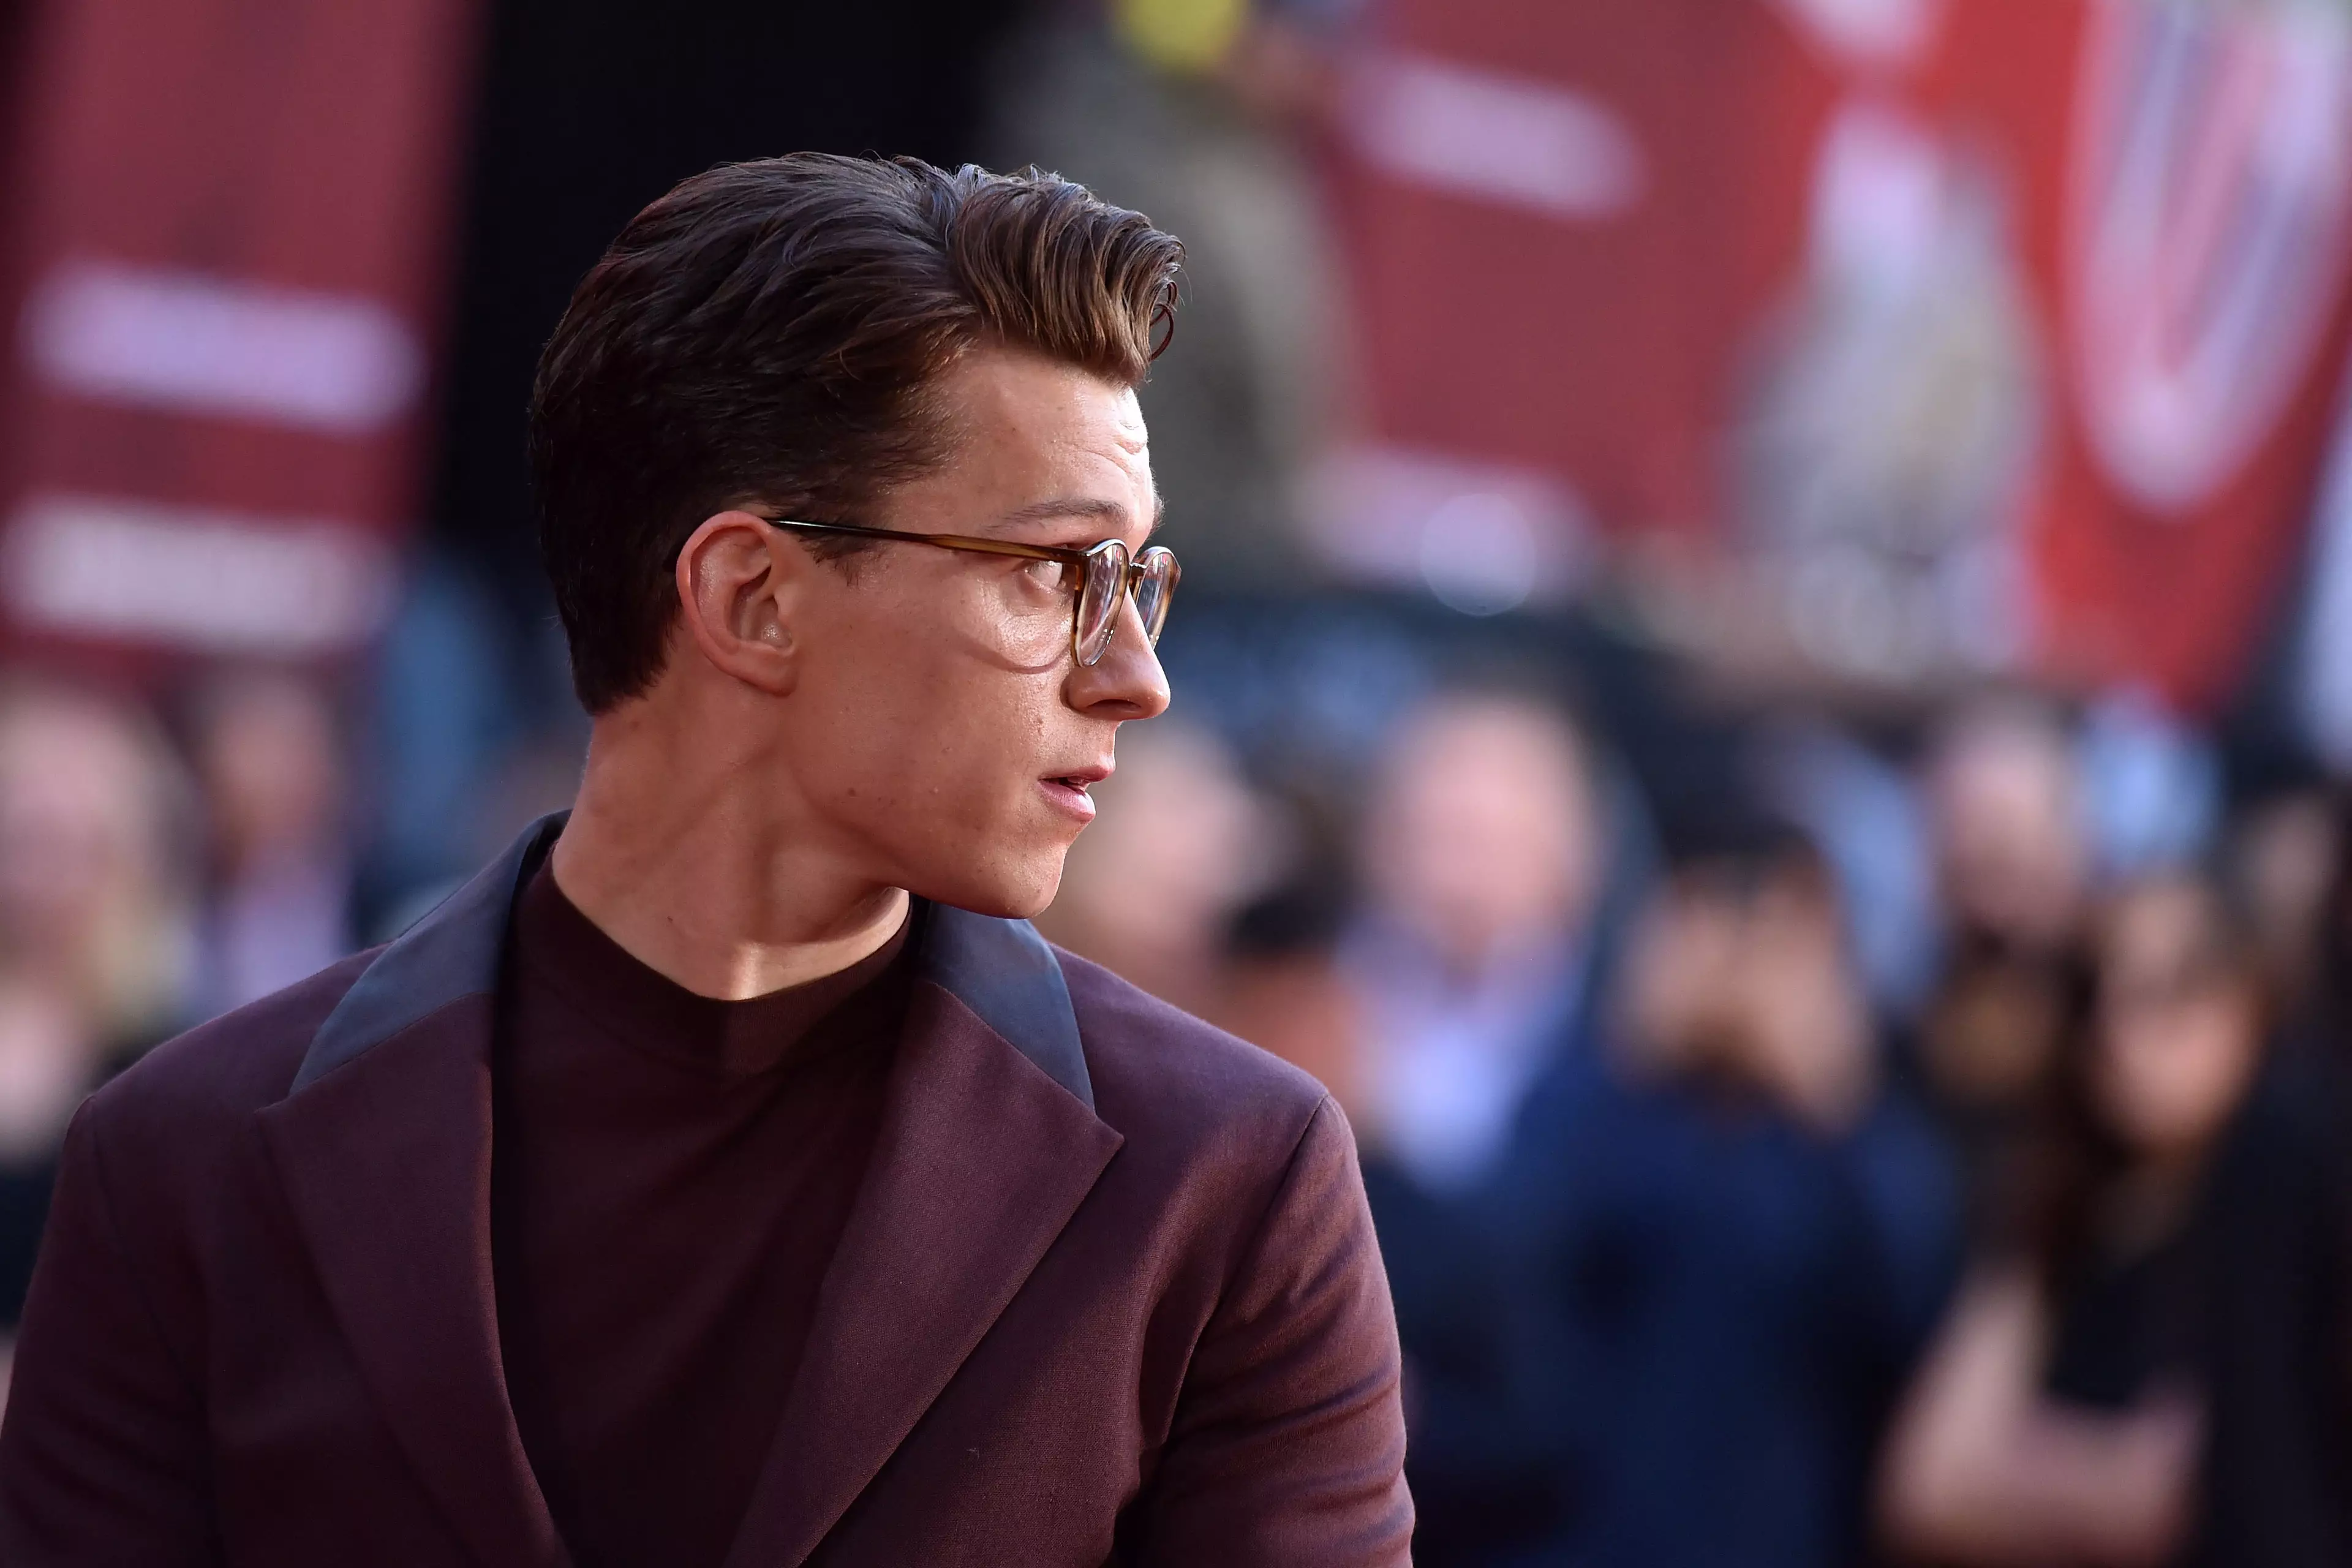 Tom Holland has played Spider-Man since 2016's Captain America: Civil War.